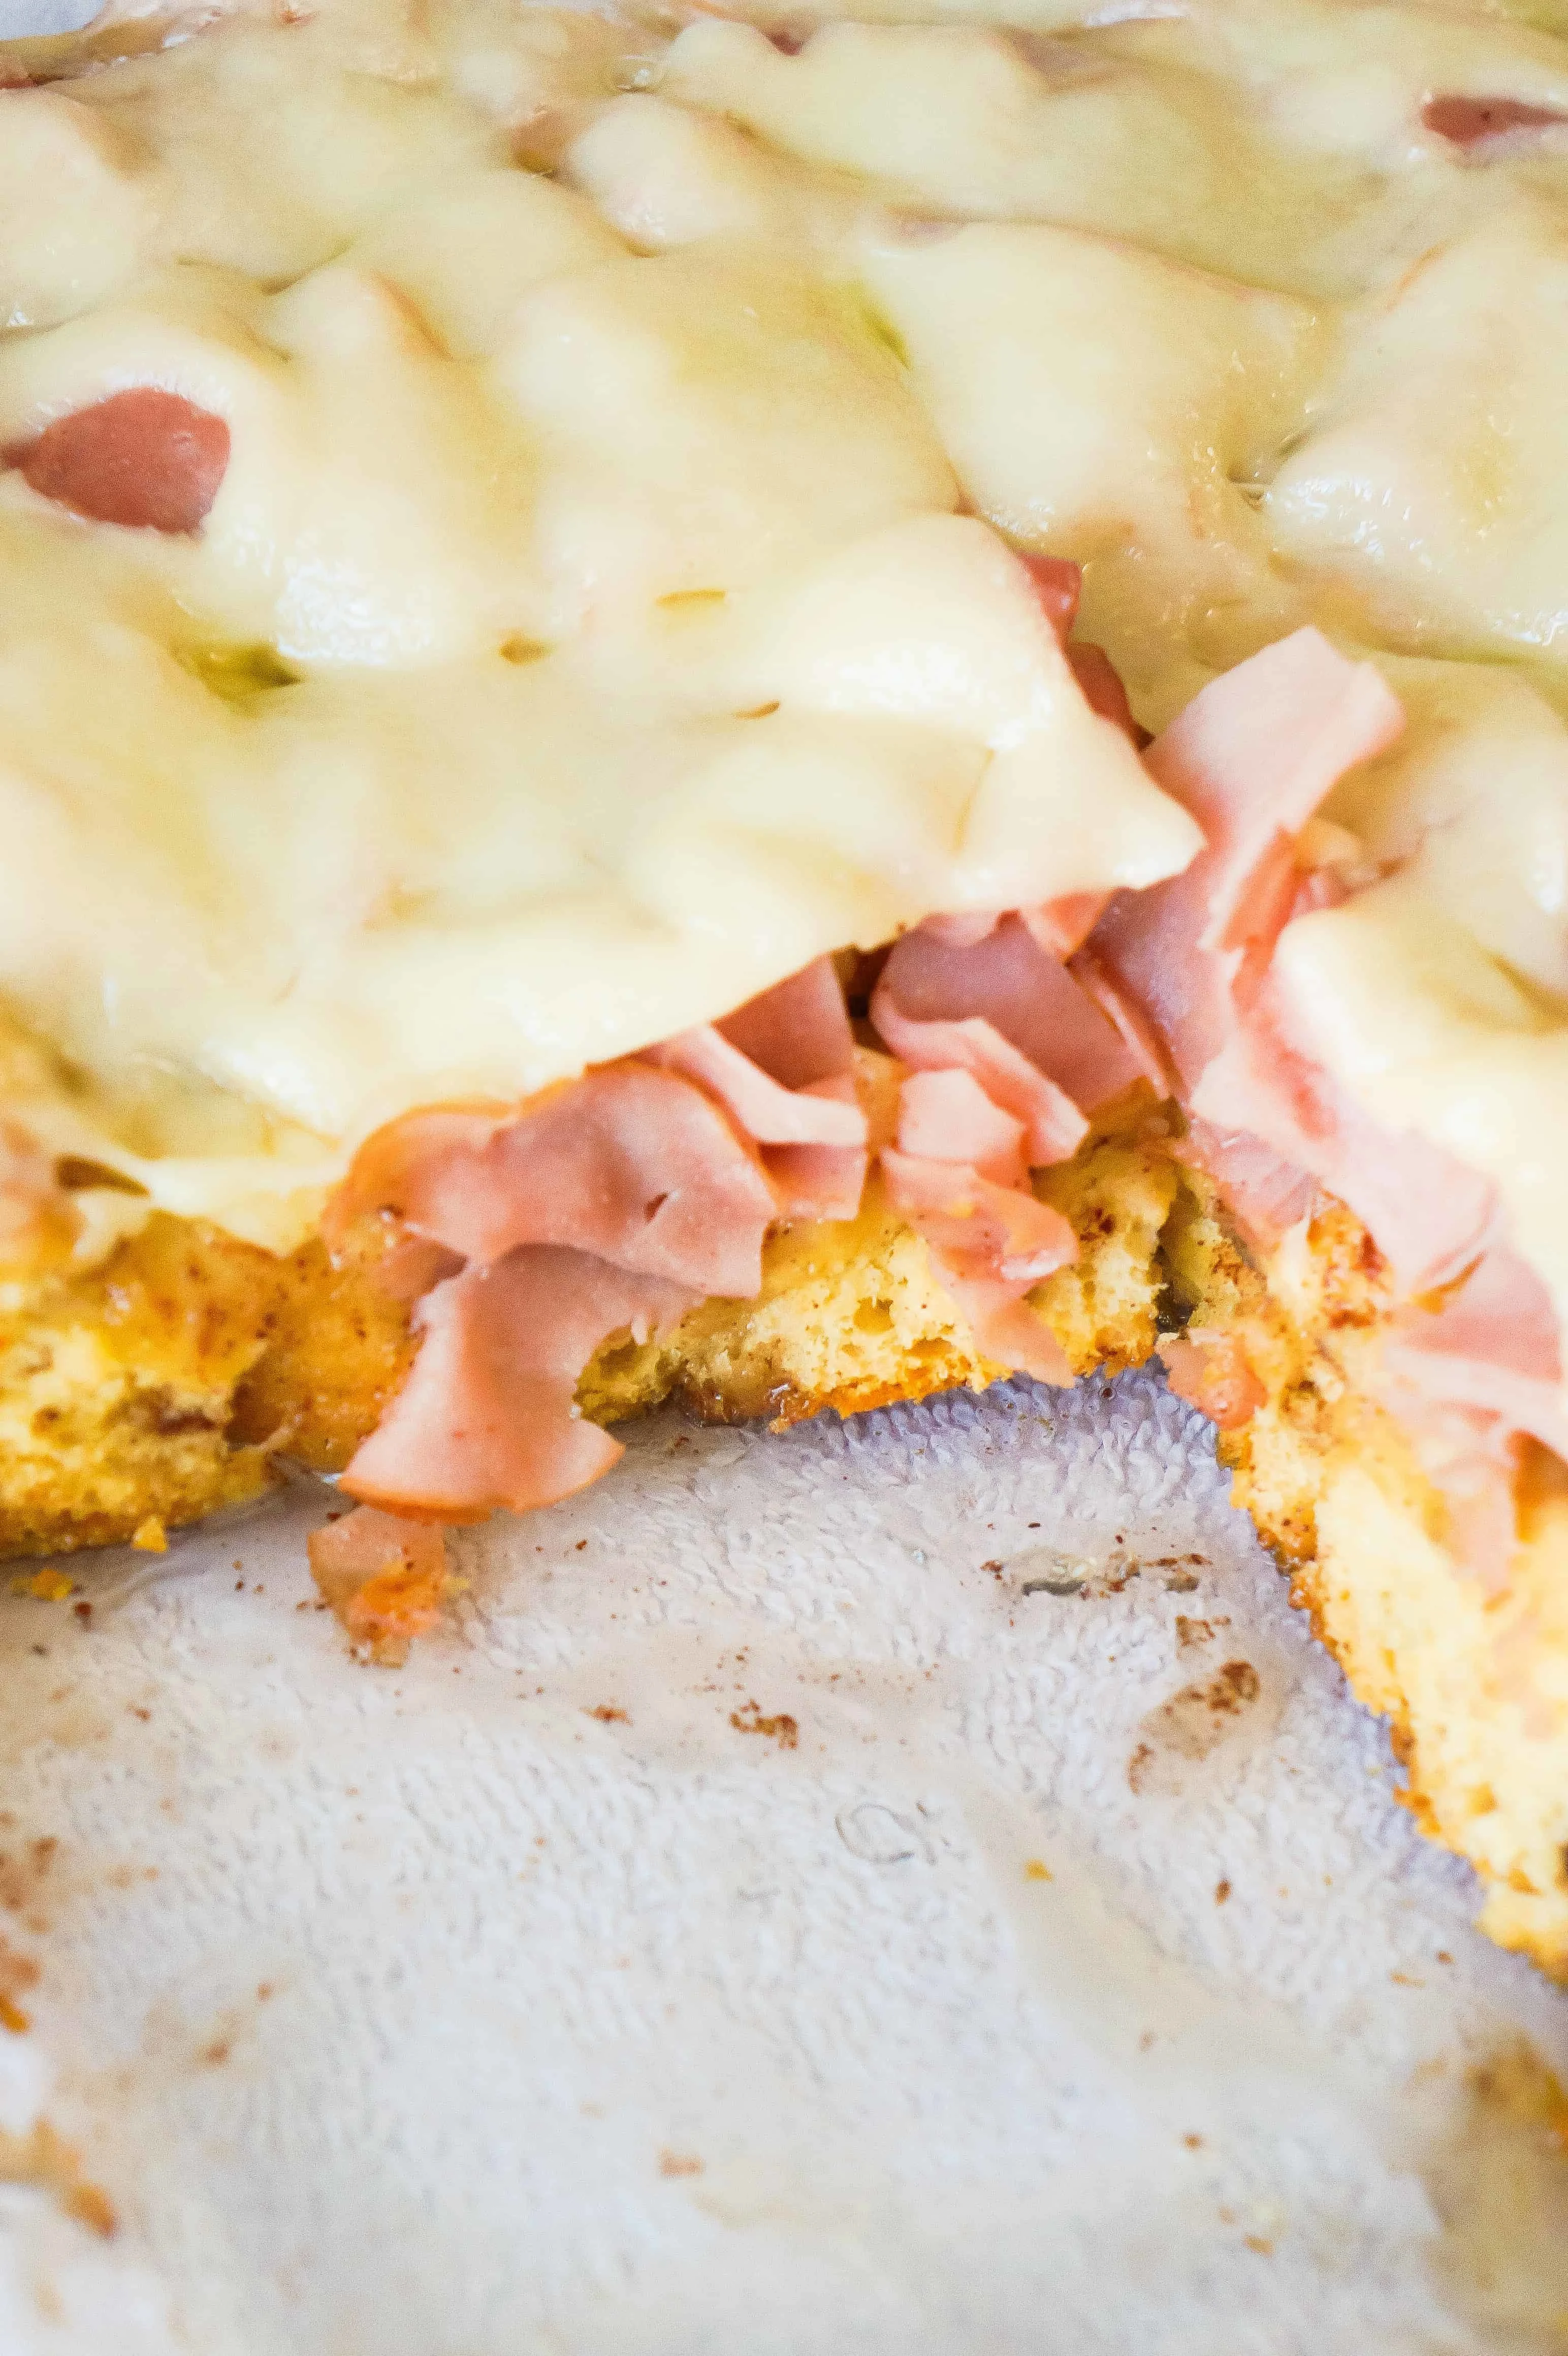 Monte Cristo Breakfast Casserole is loaded with cinnamon rolls, ham and Swiss cheese.